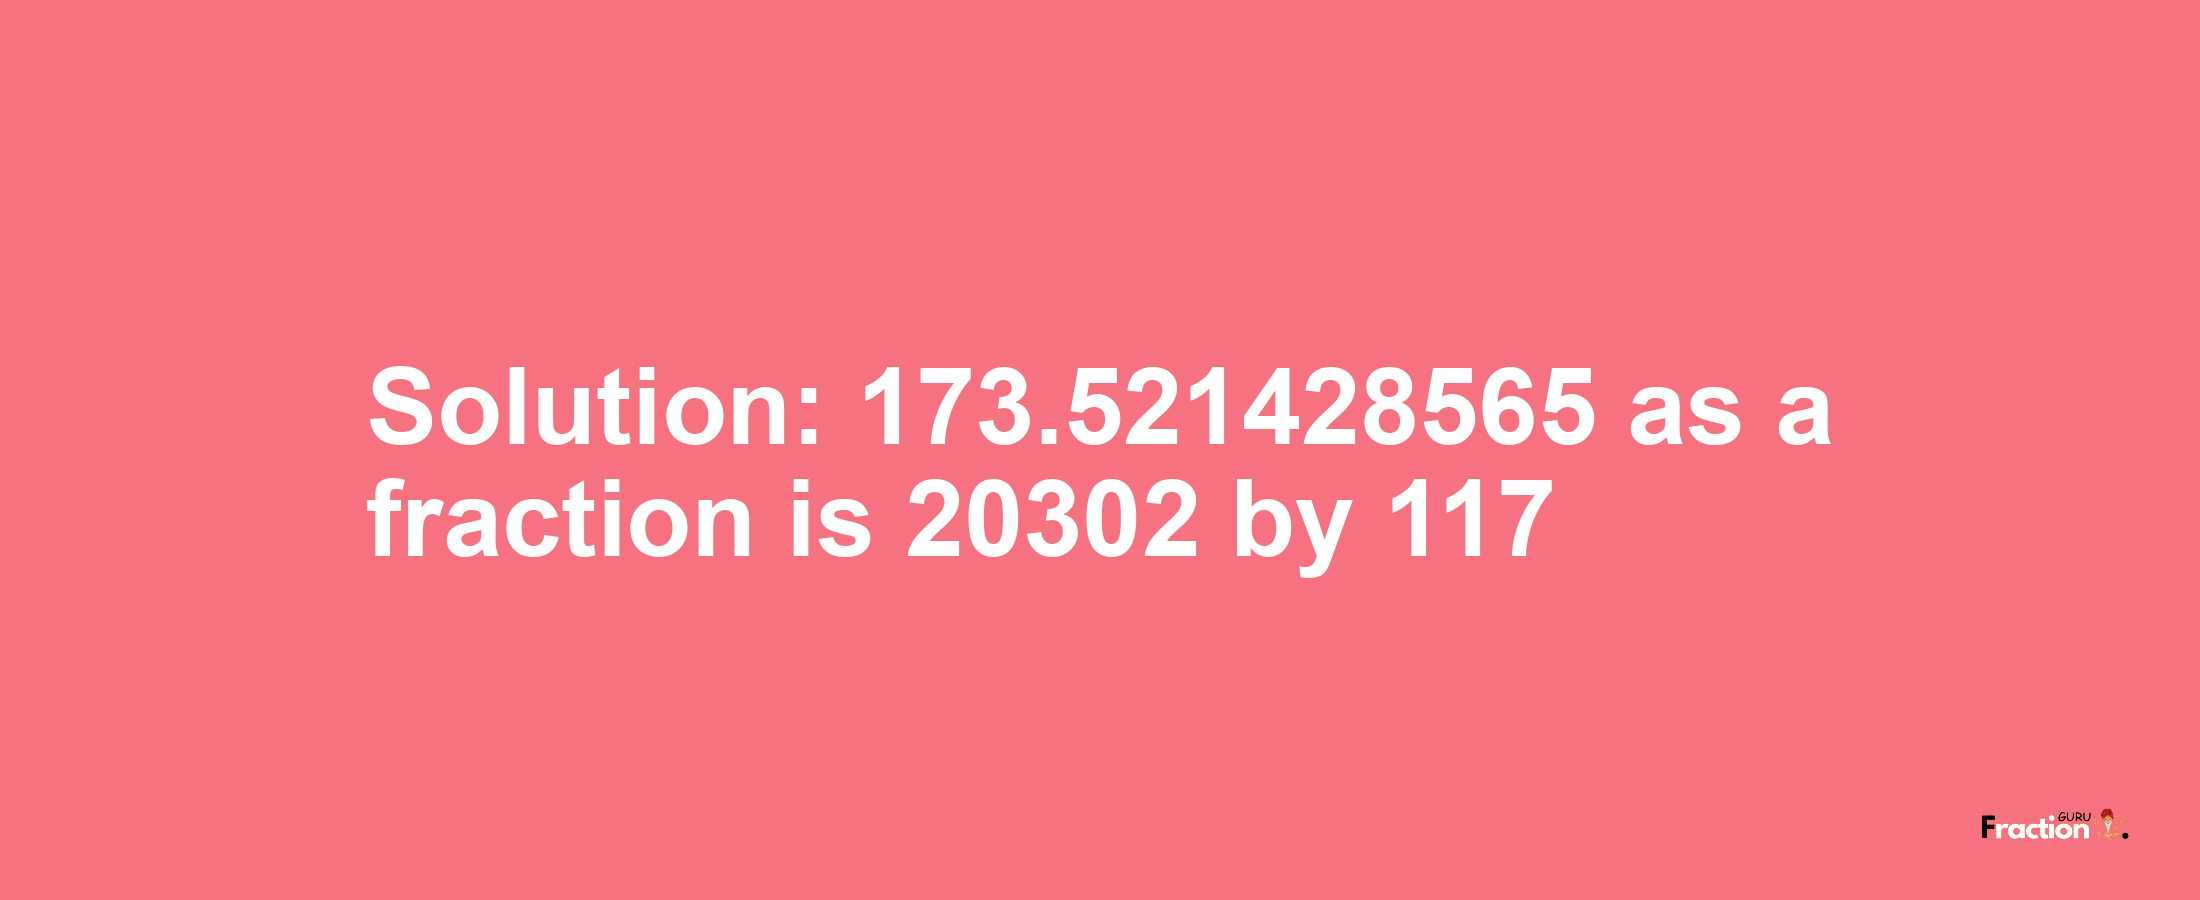 Solution:173.521428565 as a fraction is 20302/117